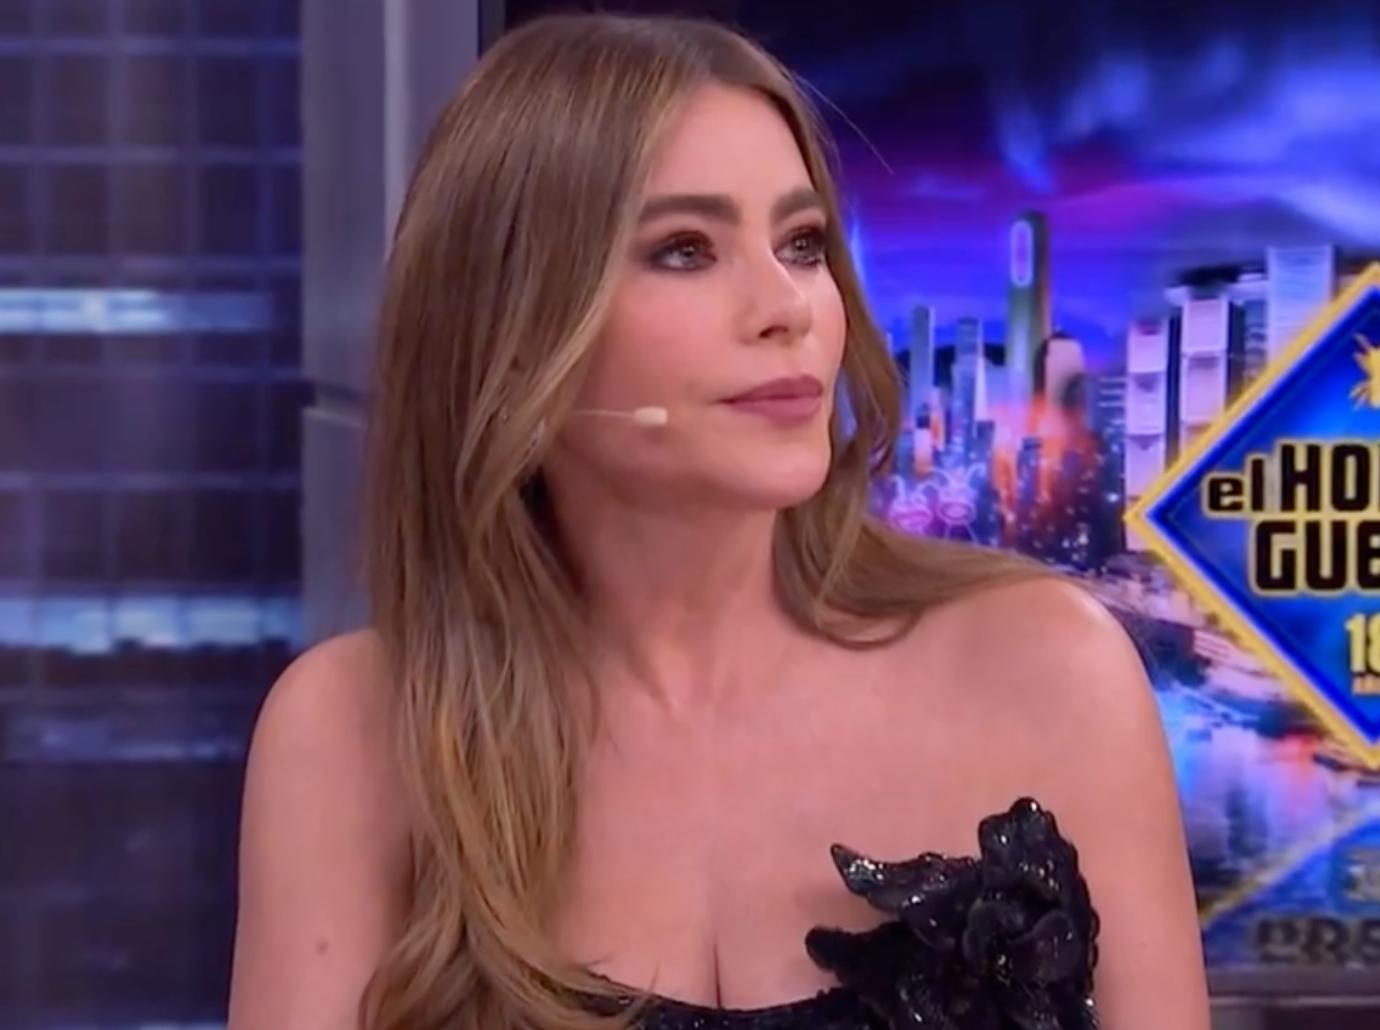 Sofia Vergara accidentally exposes her breast after scuffle in